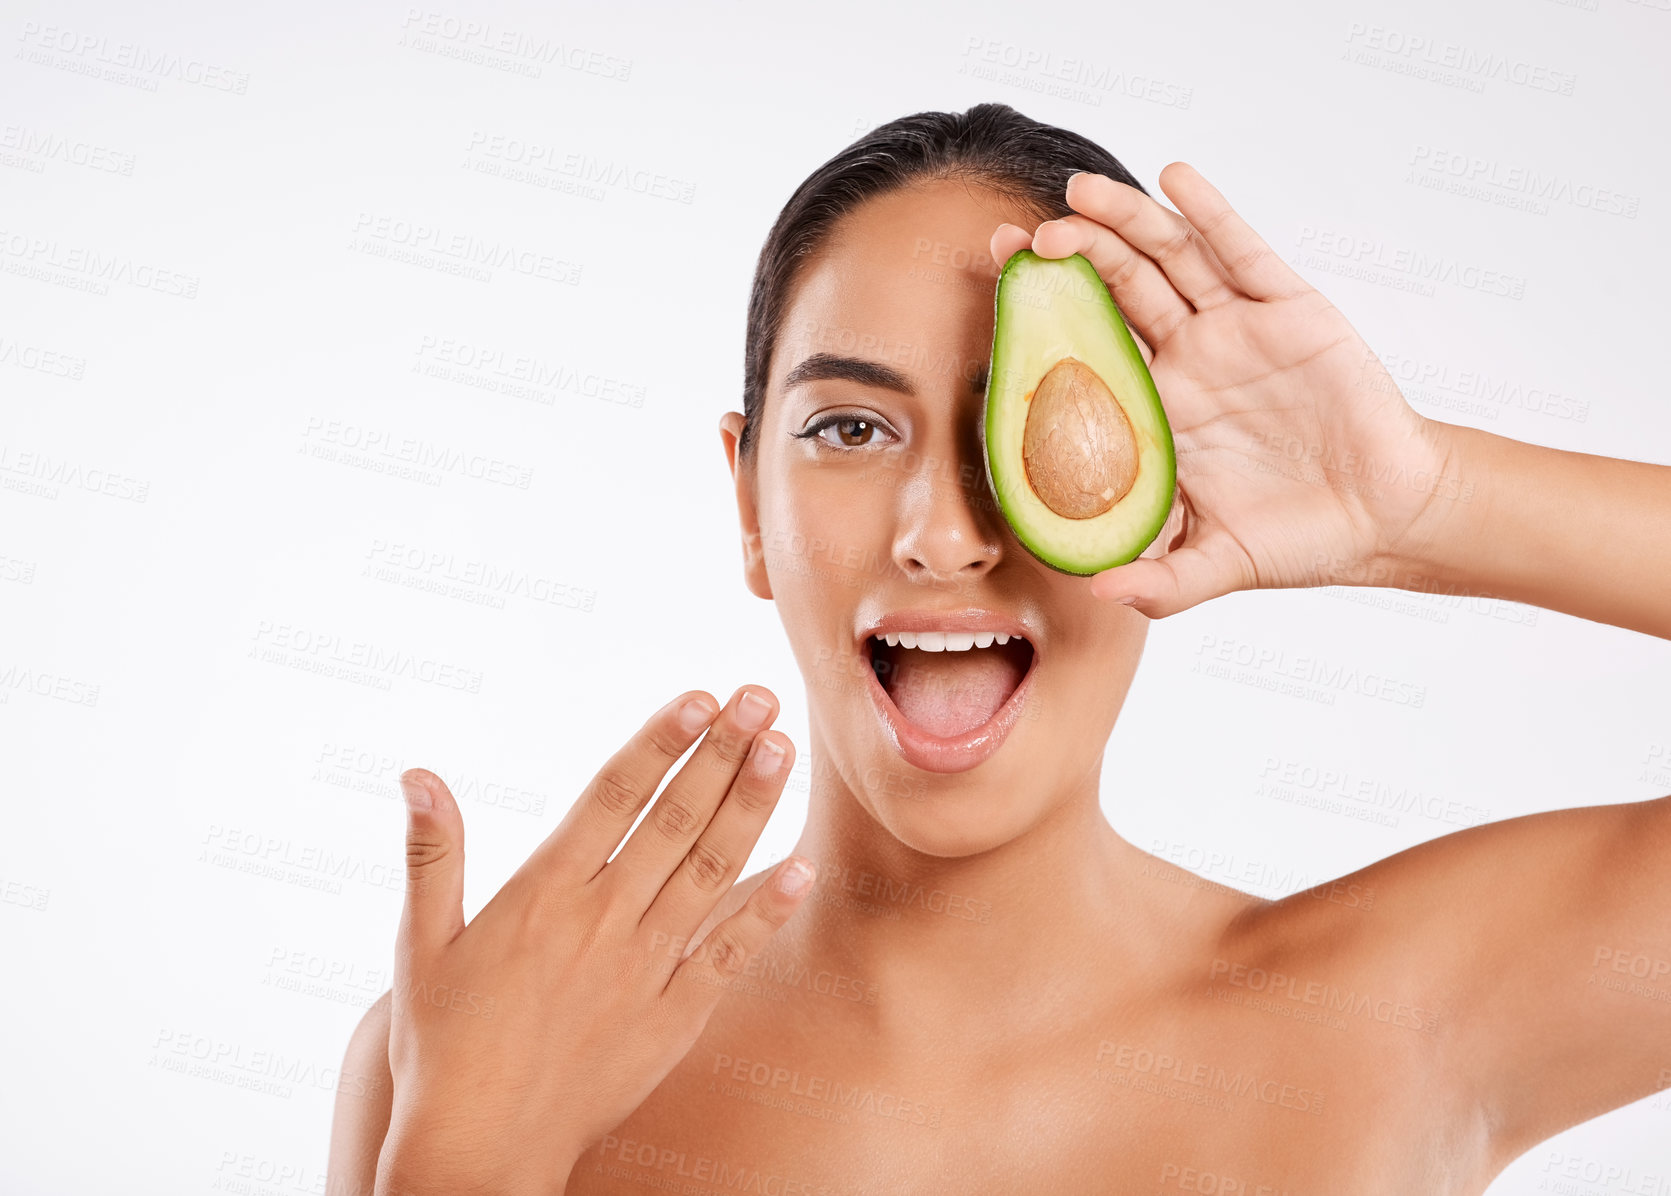 Buy stock photo Studio portrait of a beautiful young woman holding half an avocado against a gray background